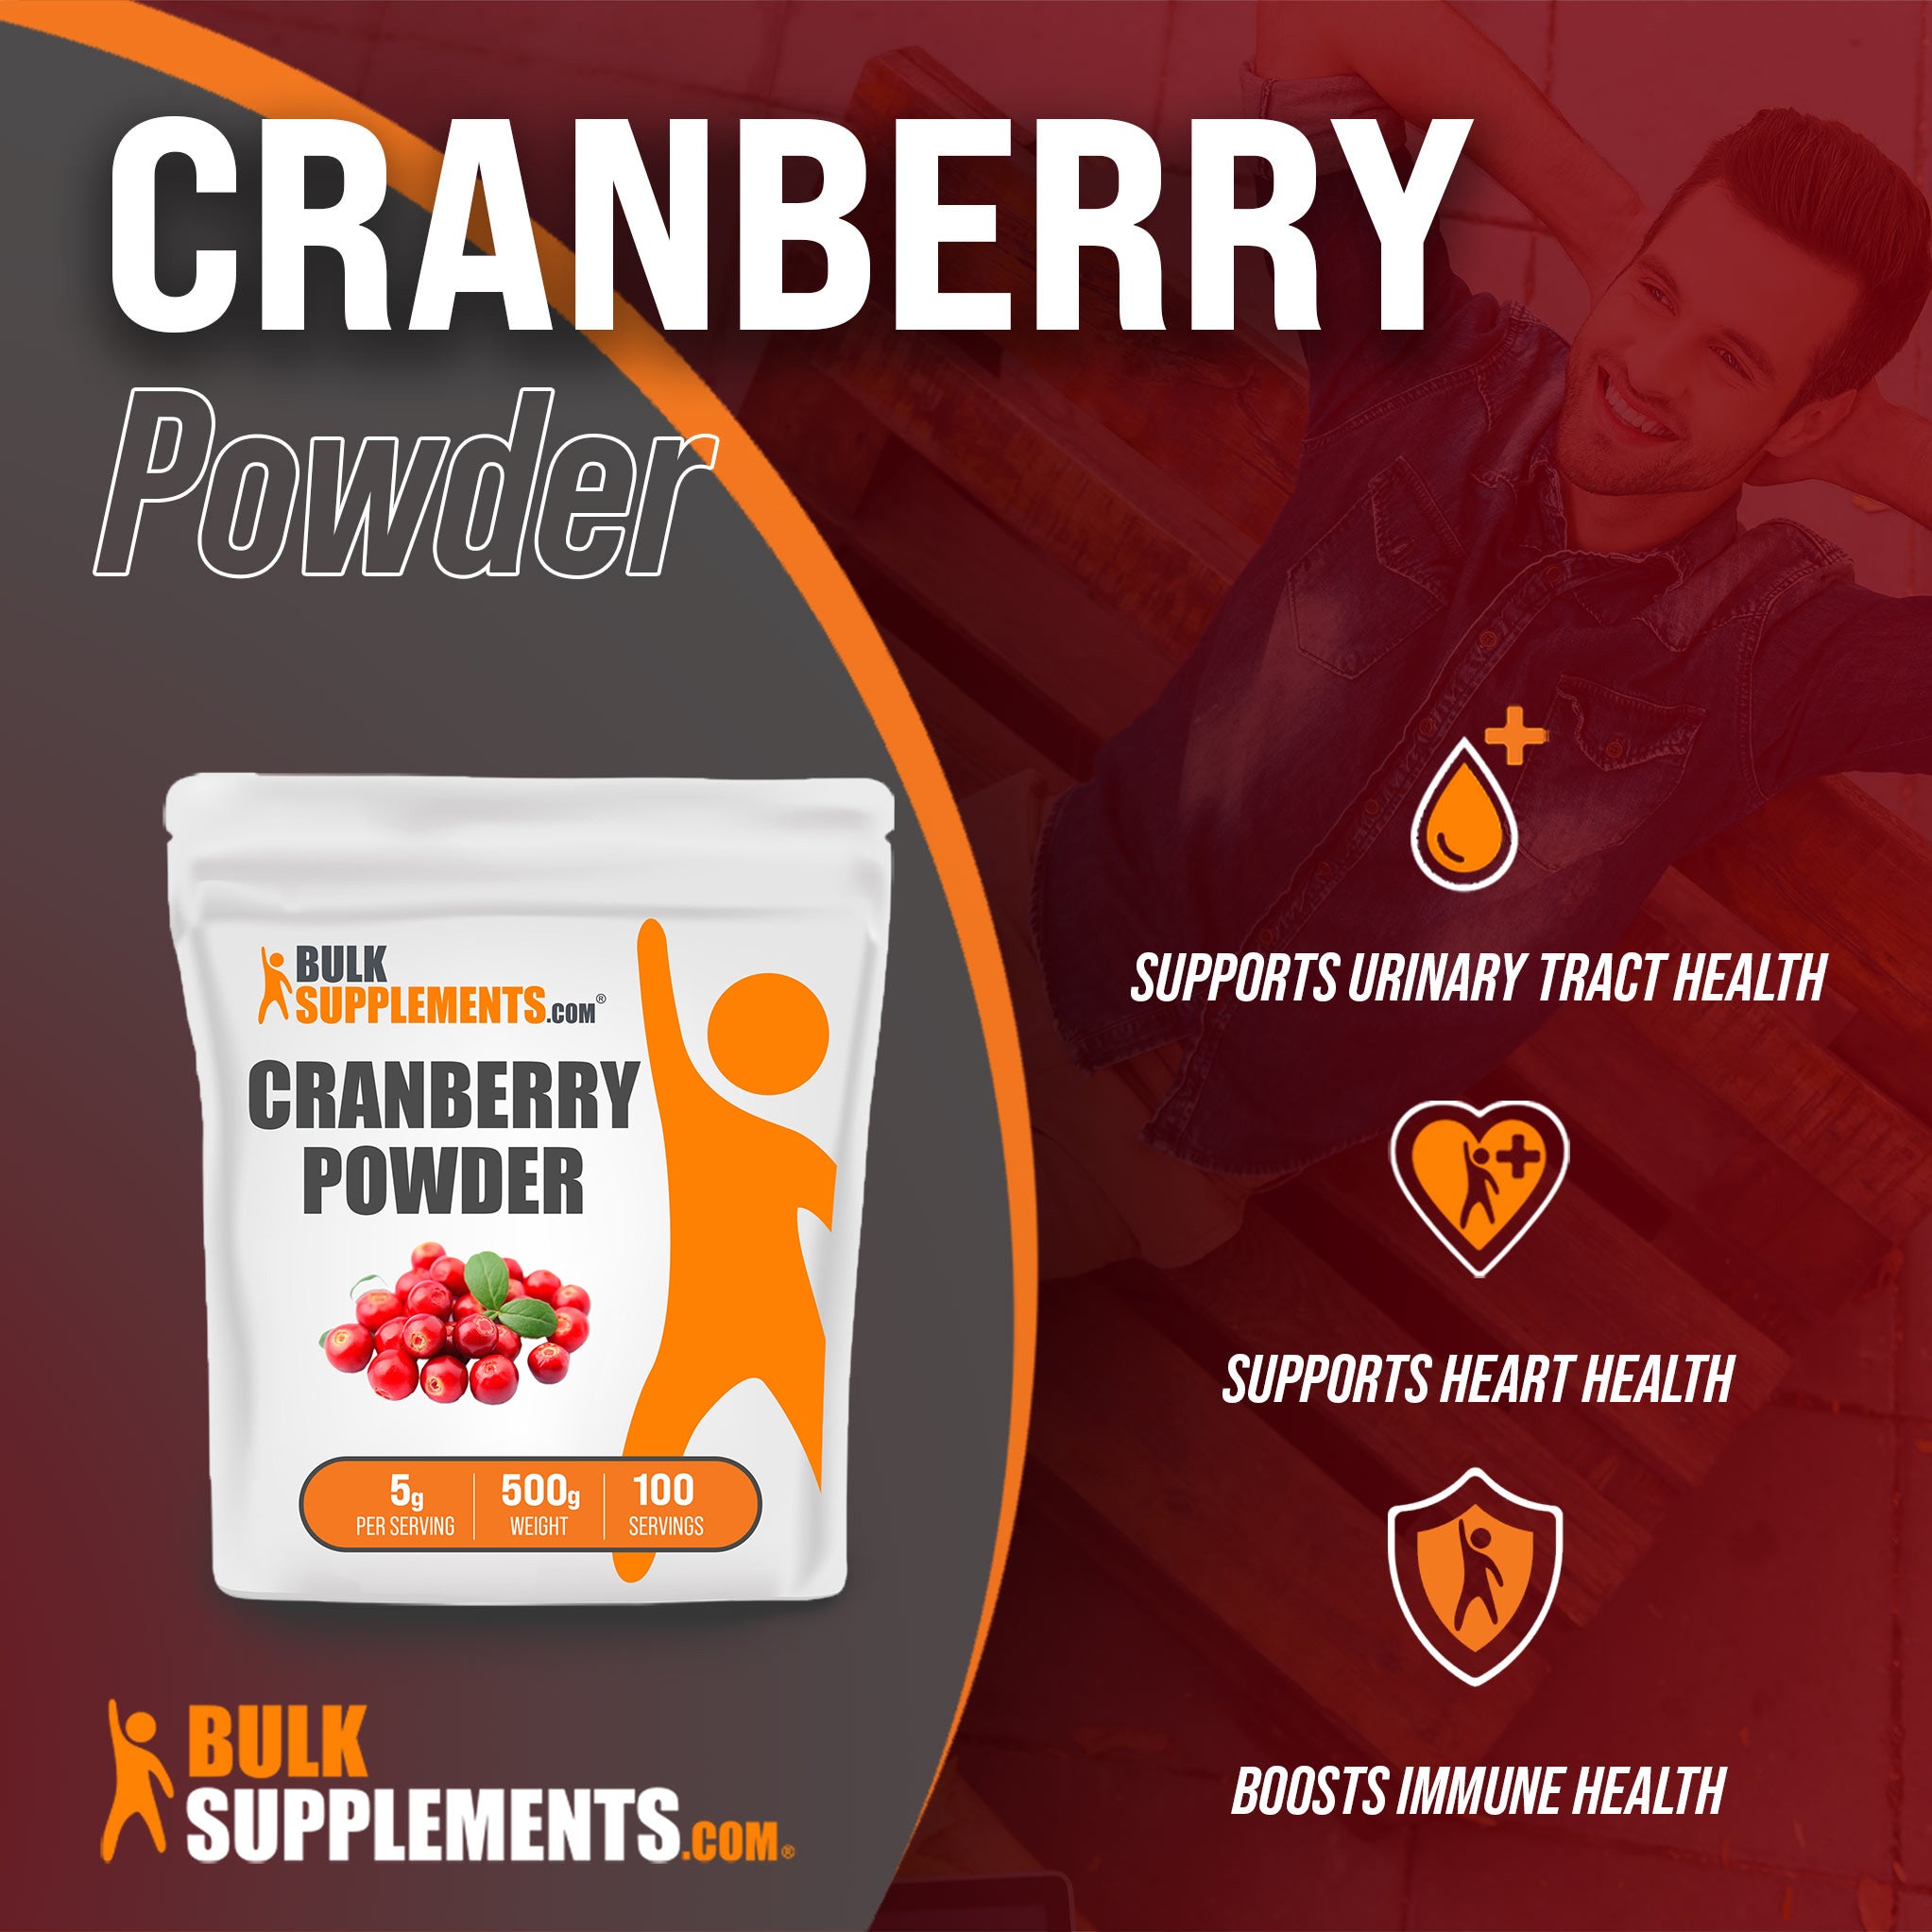 Benefits of Cranberry Powder; supports urinary tract health, supports heart health, boosts immune health